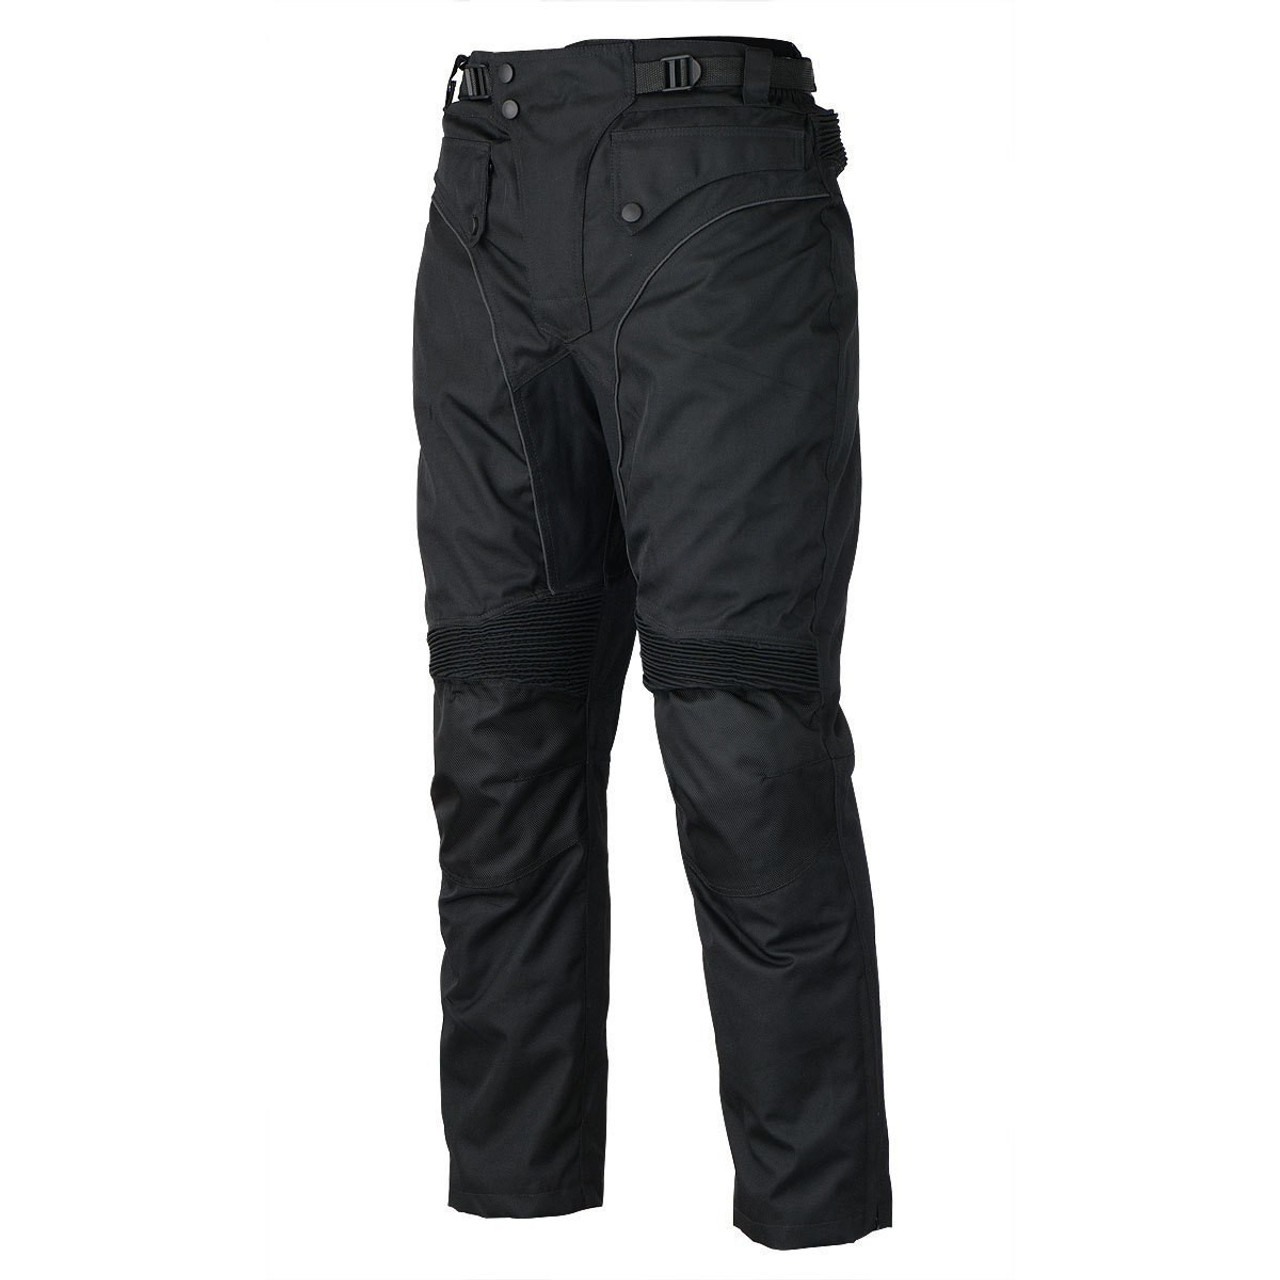 MOTO CENTRIC Motorcycle Riding Jeans With Armor - ShopperBoard